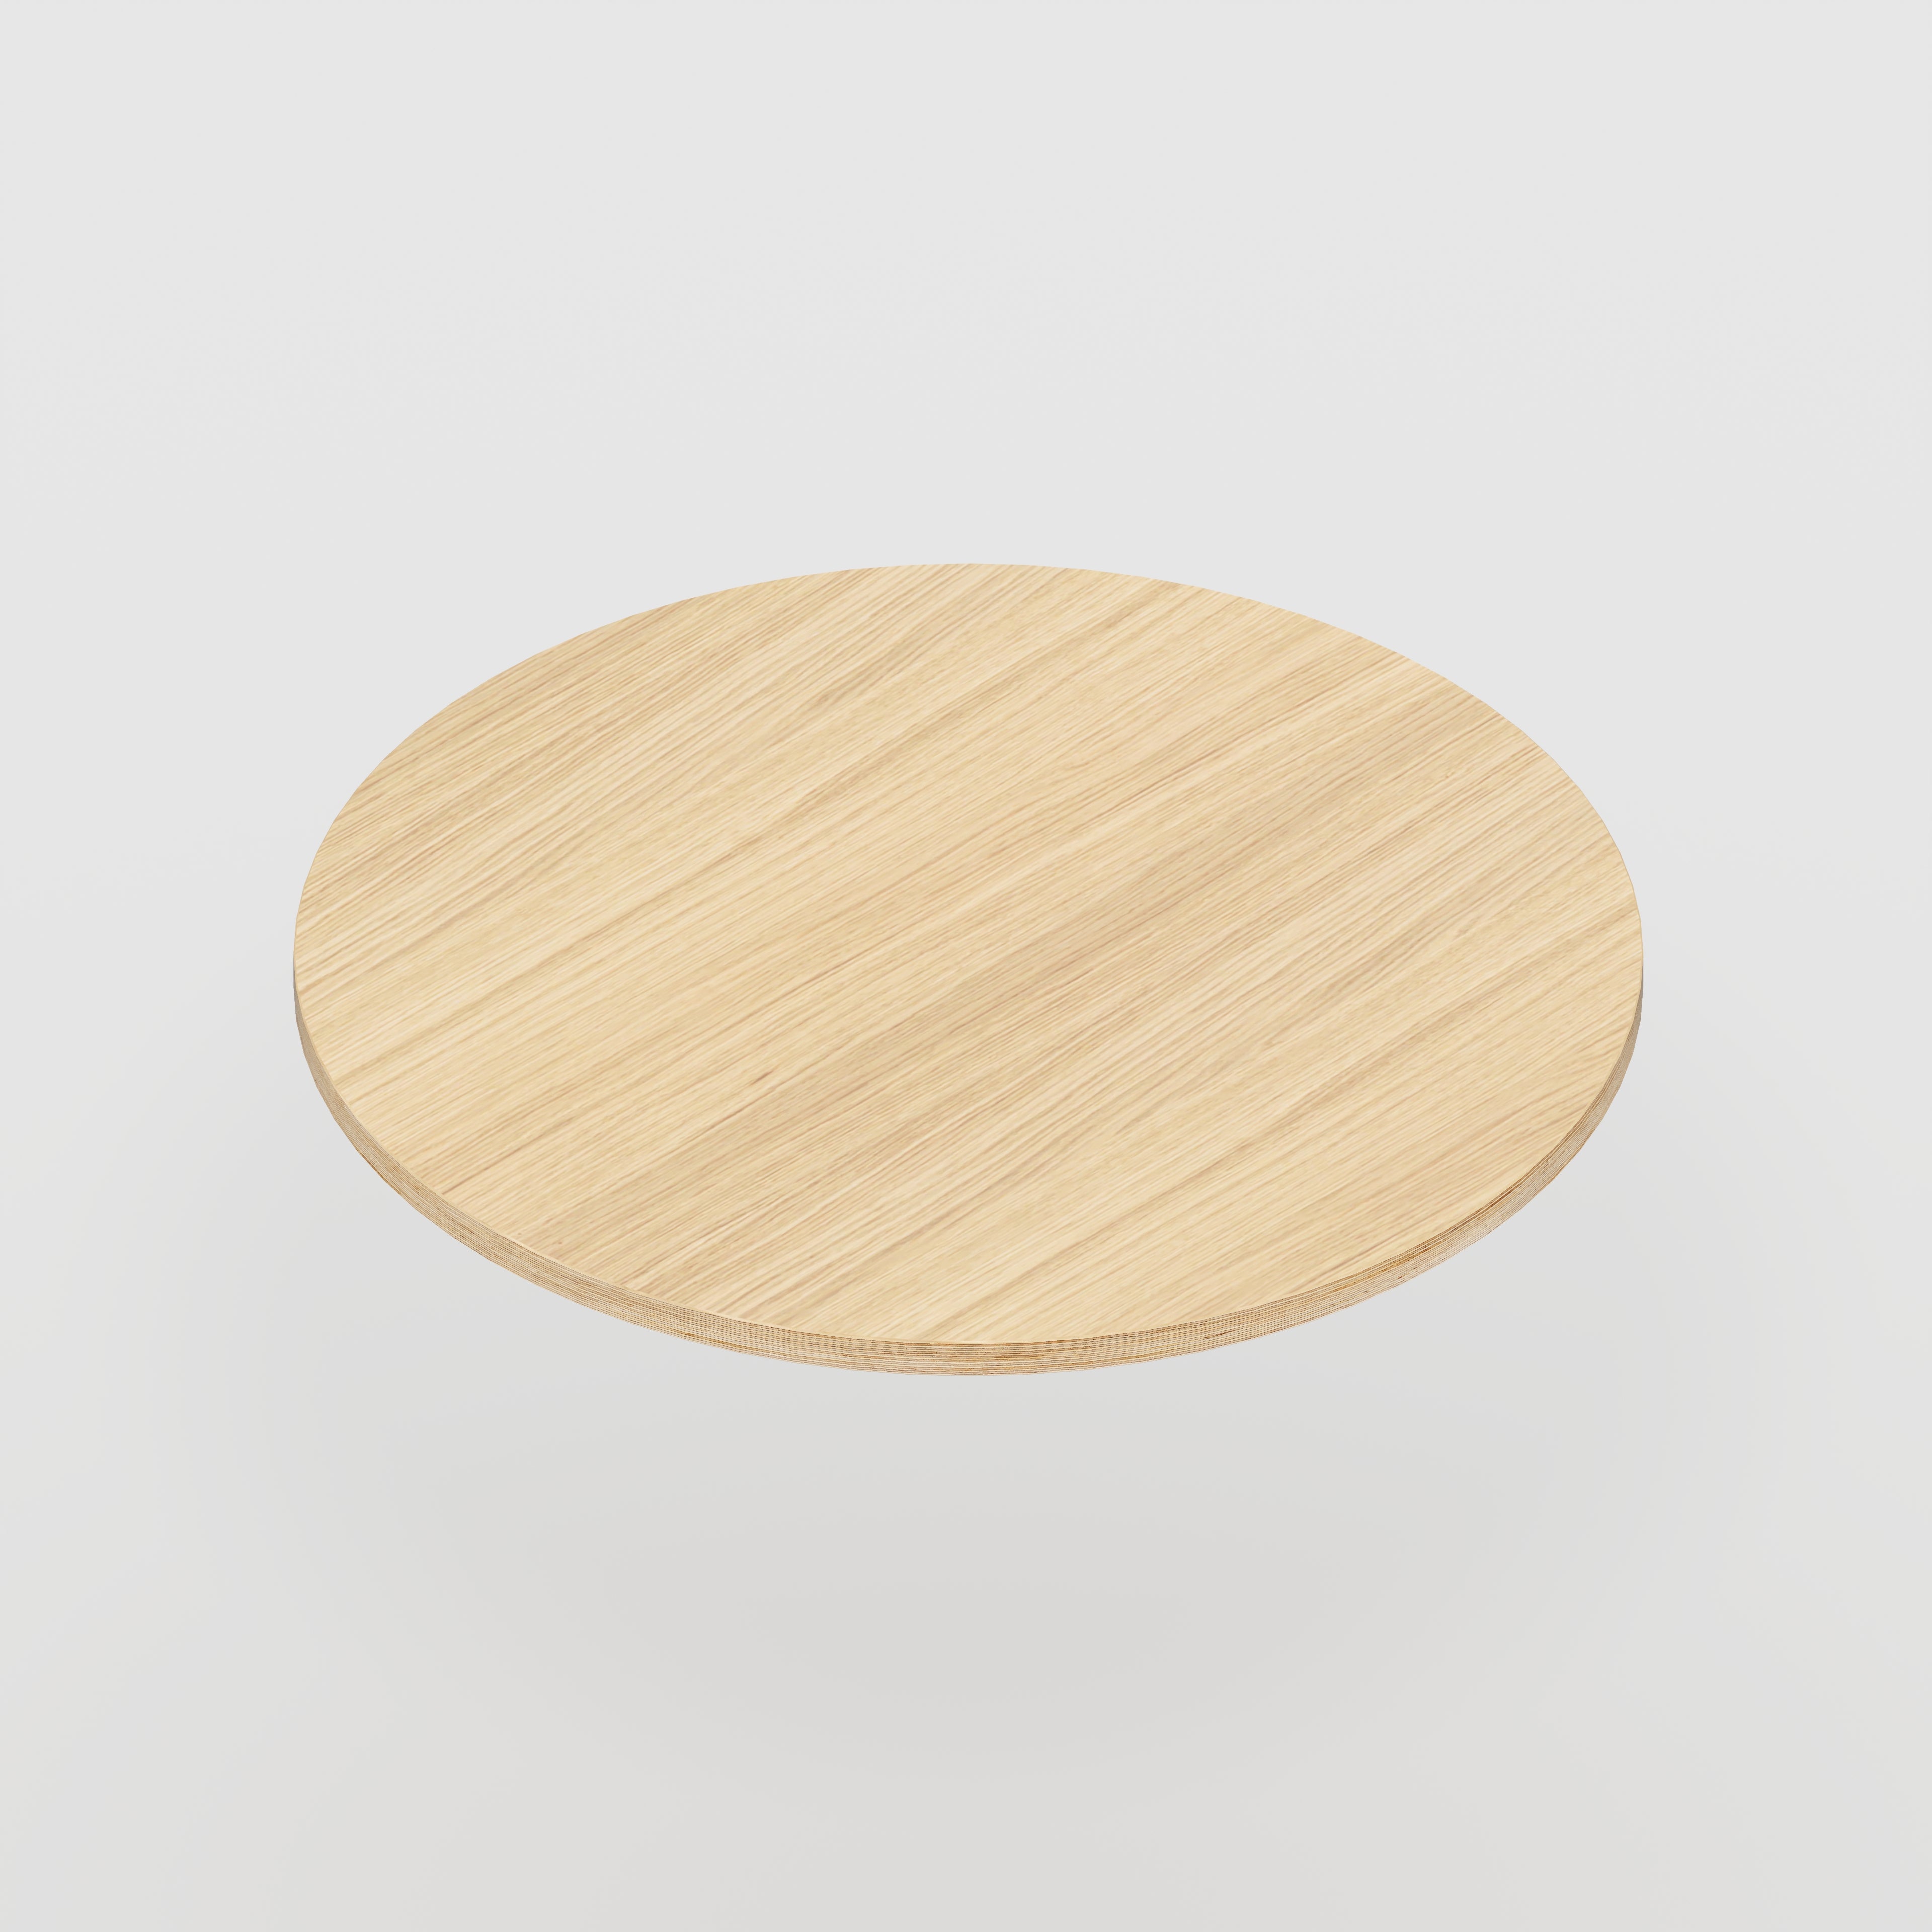 Plywood Round Tabletop - Plywood Oak - 800(dia) - 24mm